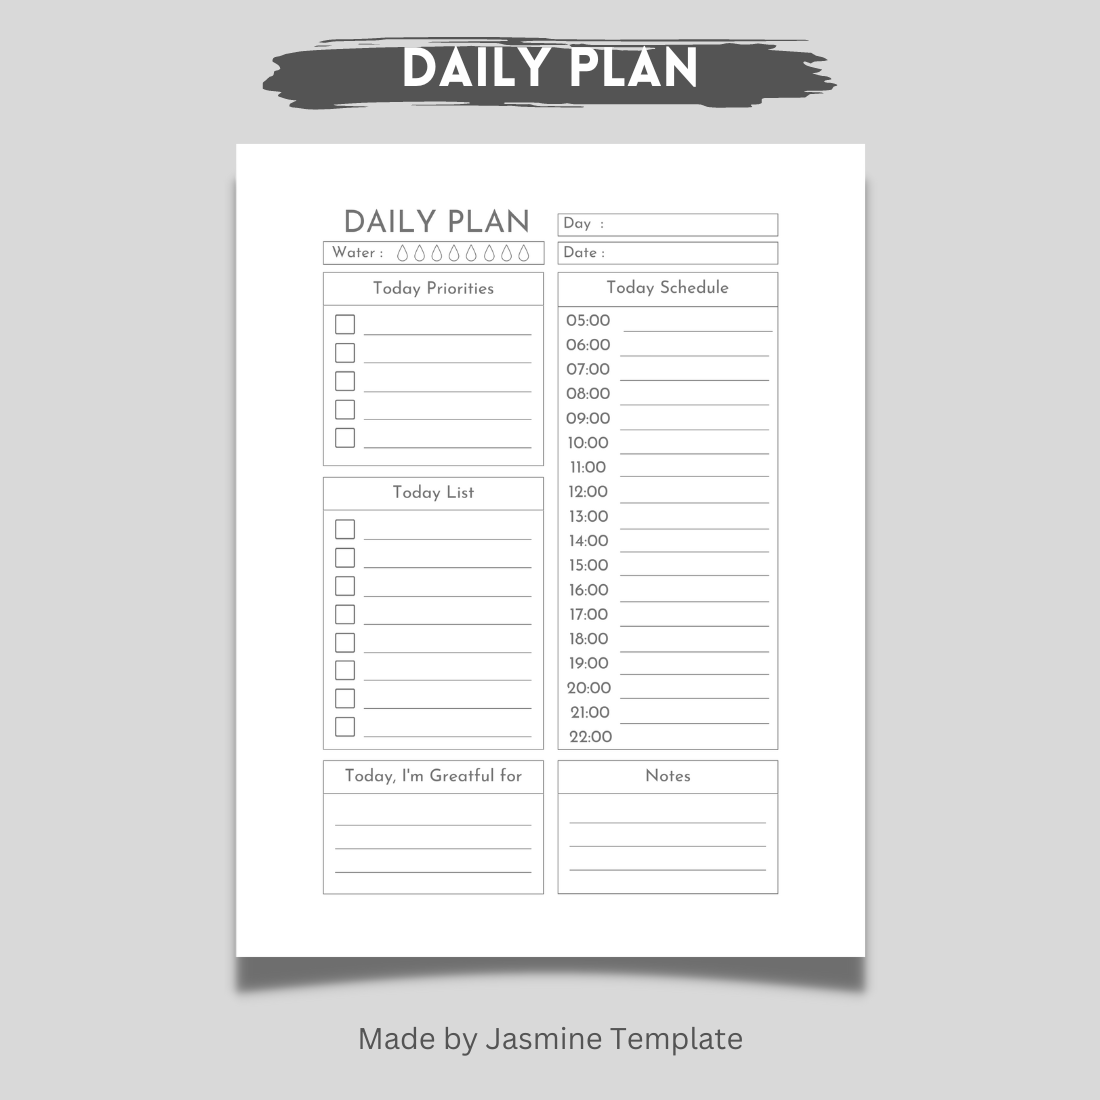 Your daily plan.